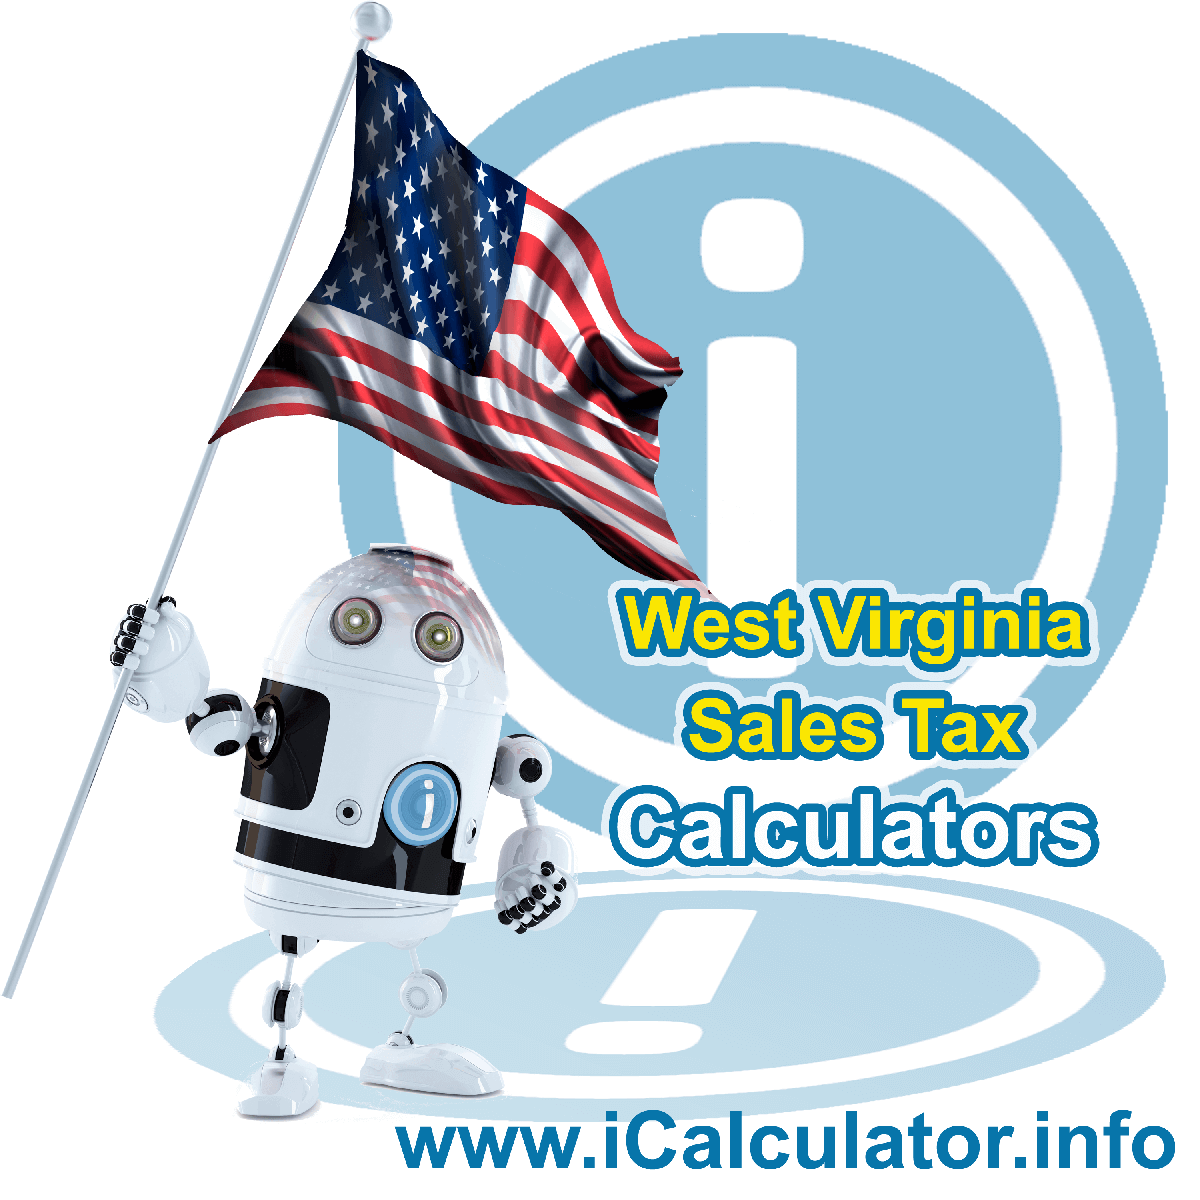 West Virginia Sales Tax Comparison Calculator: This image illustrates a calculator robot comparing sales tax in West Virginia manually using the West Virginia Sales Tax Formula. You can use this information to compare Sales Tax manually or use the West Virginia Sales Tax Comparison Calculator to calculate and compare West Virginia sales tax online.